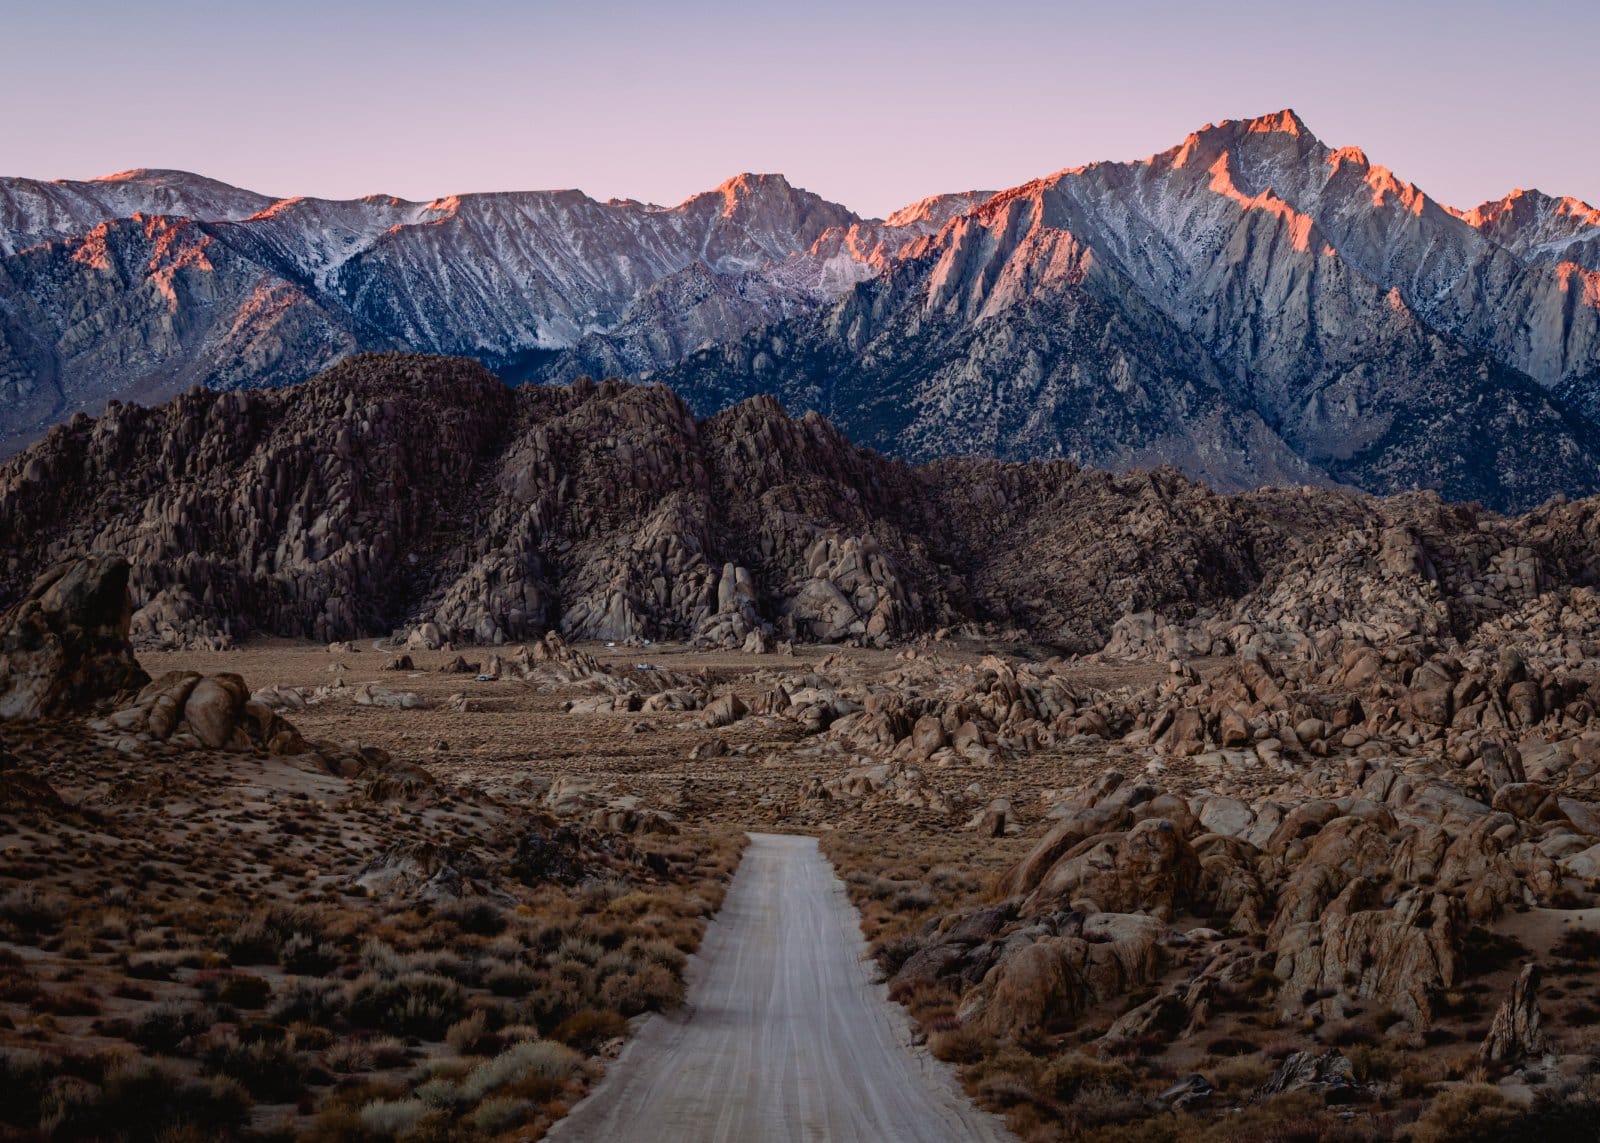 <p class="wp-caption-text">Image Credit: Shutterstock / chasehunterphotos</p>  <p><span><strong>Height:</strong> 14,505 feet</span> <span>The tallest peak in the contiguous US, Mount Whitney is accessible via a challenging but non-technical day hike, with permits required. The Whitney Portal area provides less strenuous nature walks, camping, and breathtaking views suitable for the whole family.</span></p>